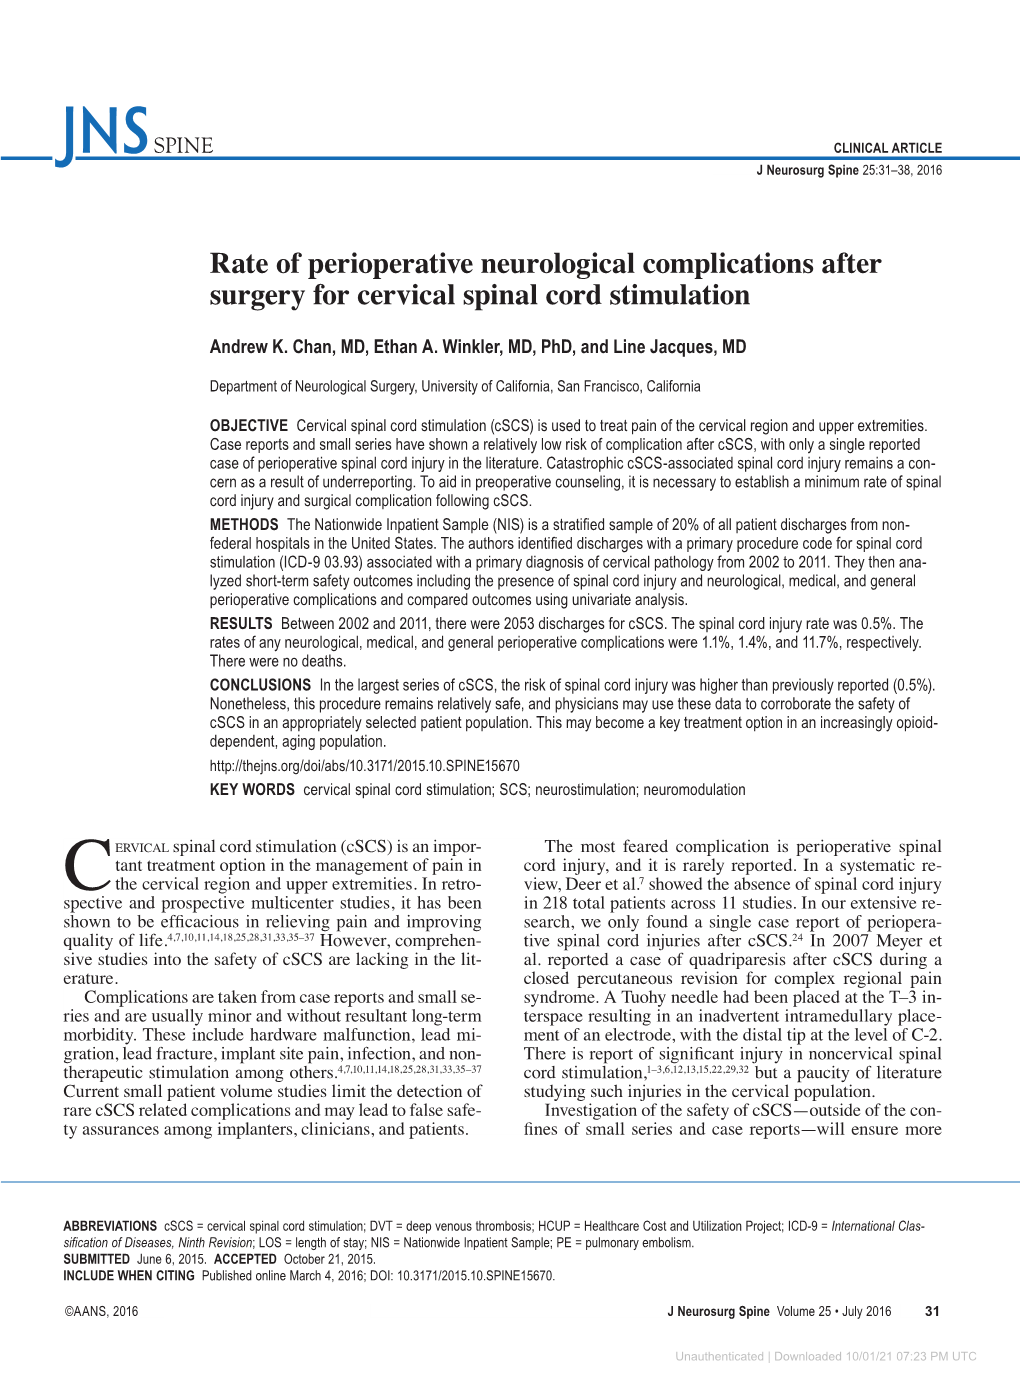 Rate of Perioperative Neurological Complications After Surgery for Cervical Spinal Cord Stimulation